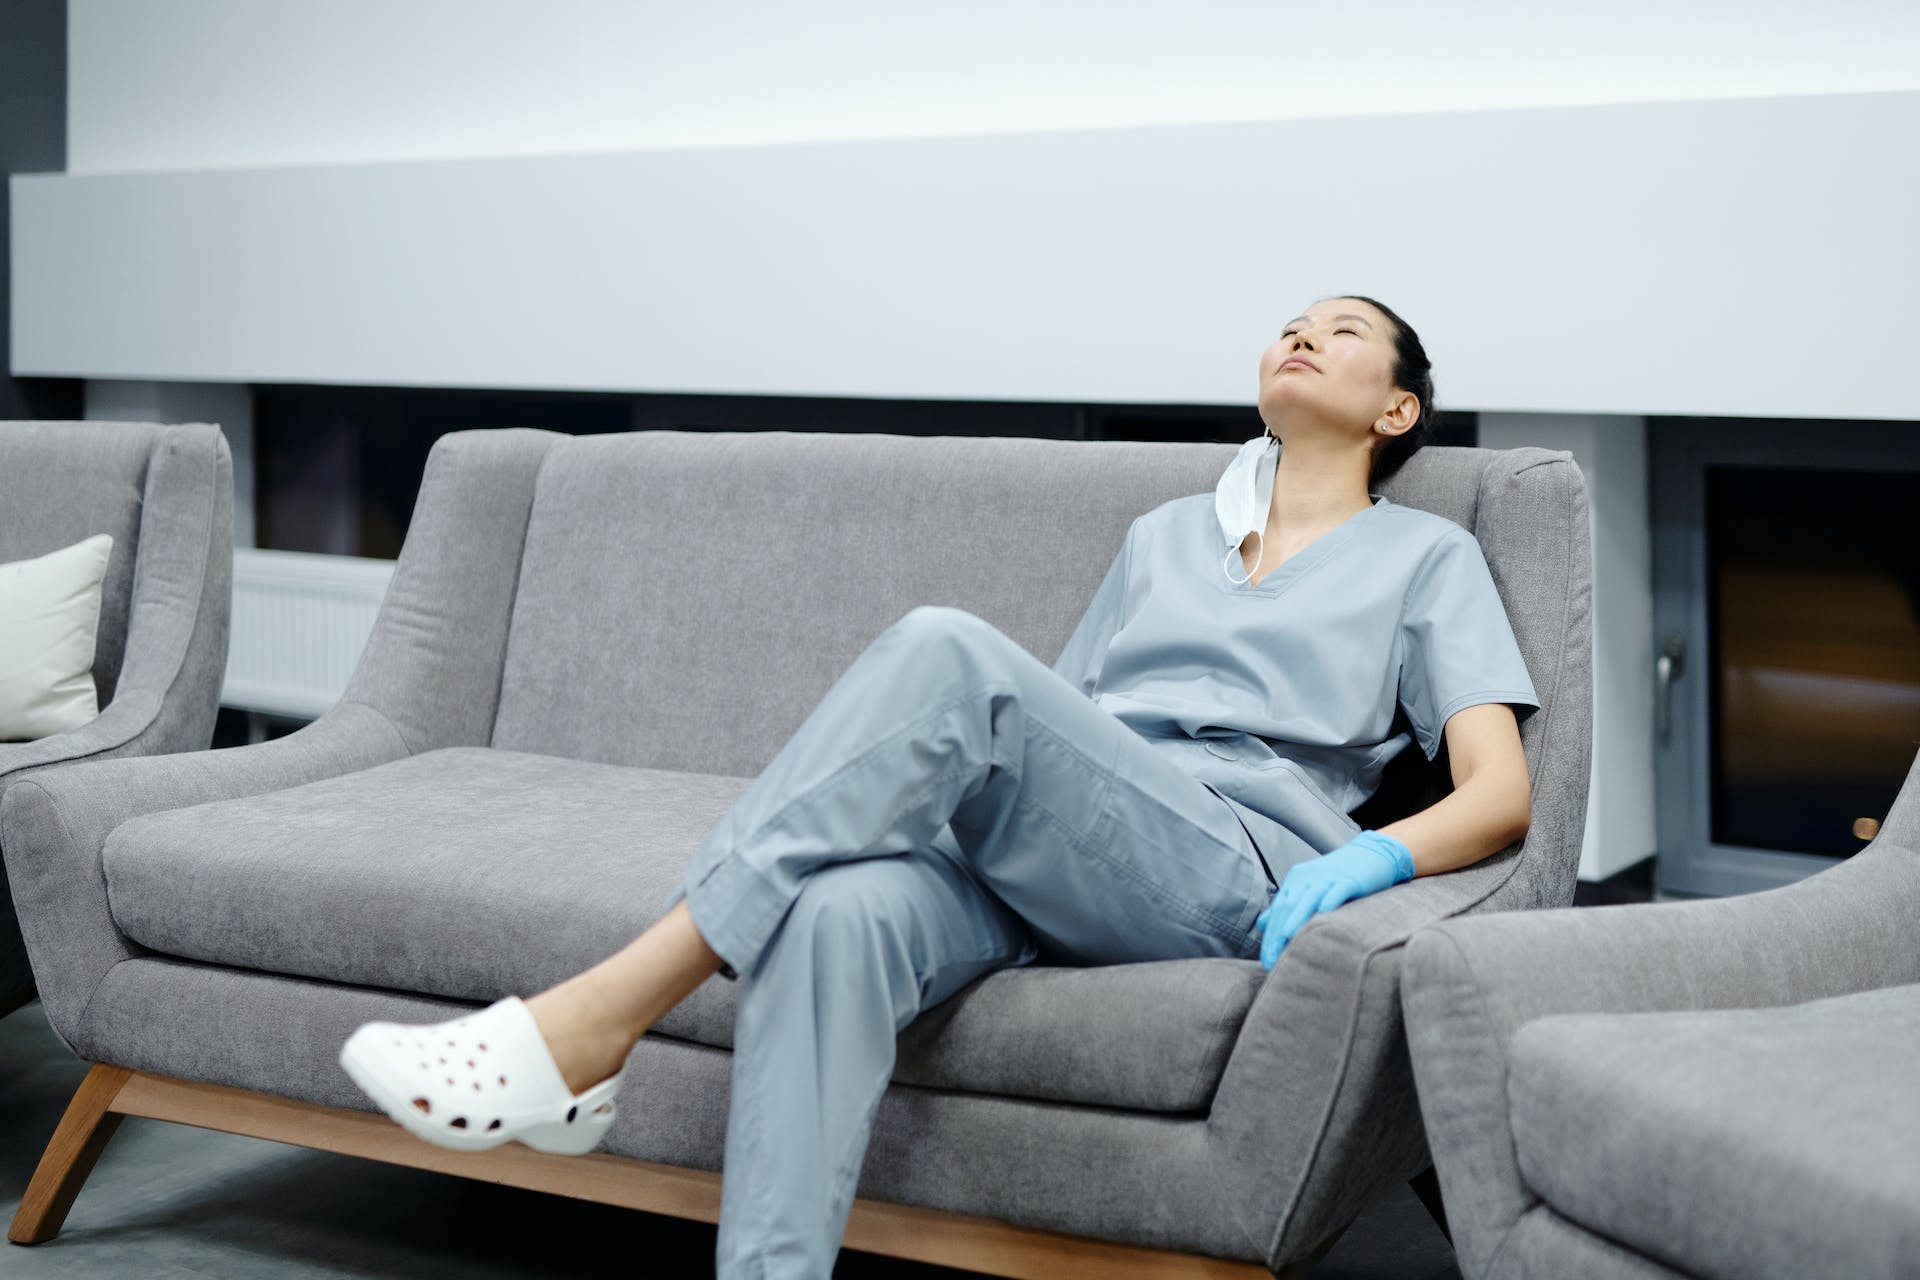 A tired woman sitting on a couch | Source: Pexels